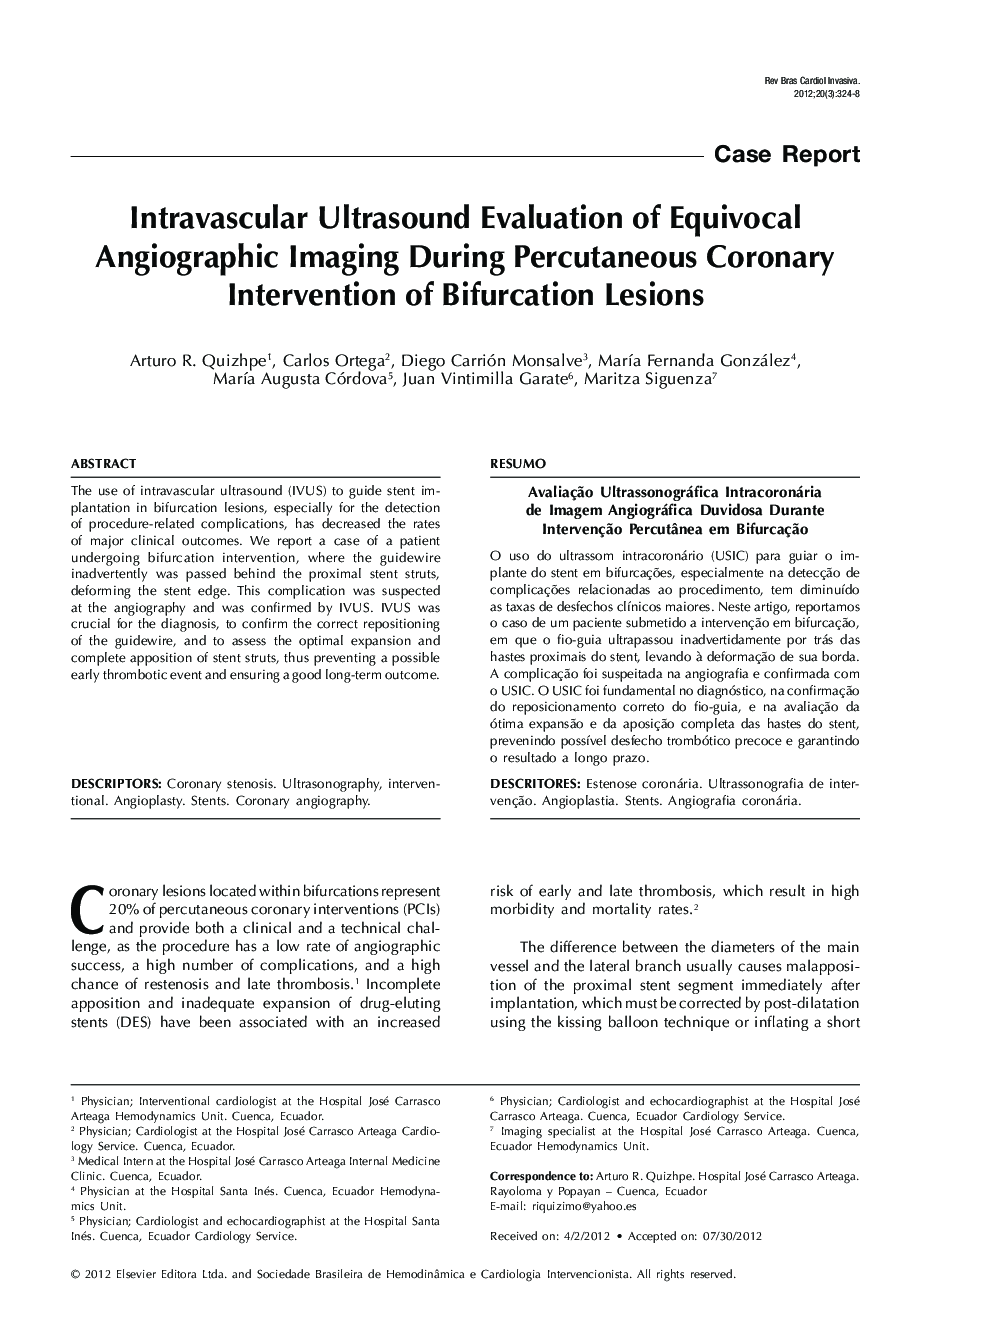 Intravascular Ultrasound Evaluation of Equivocal Angiographic Imaging During Percutaneous Coronary Intervention of Bifurcation Lesions